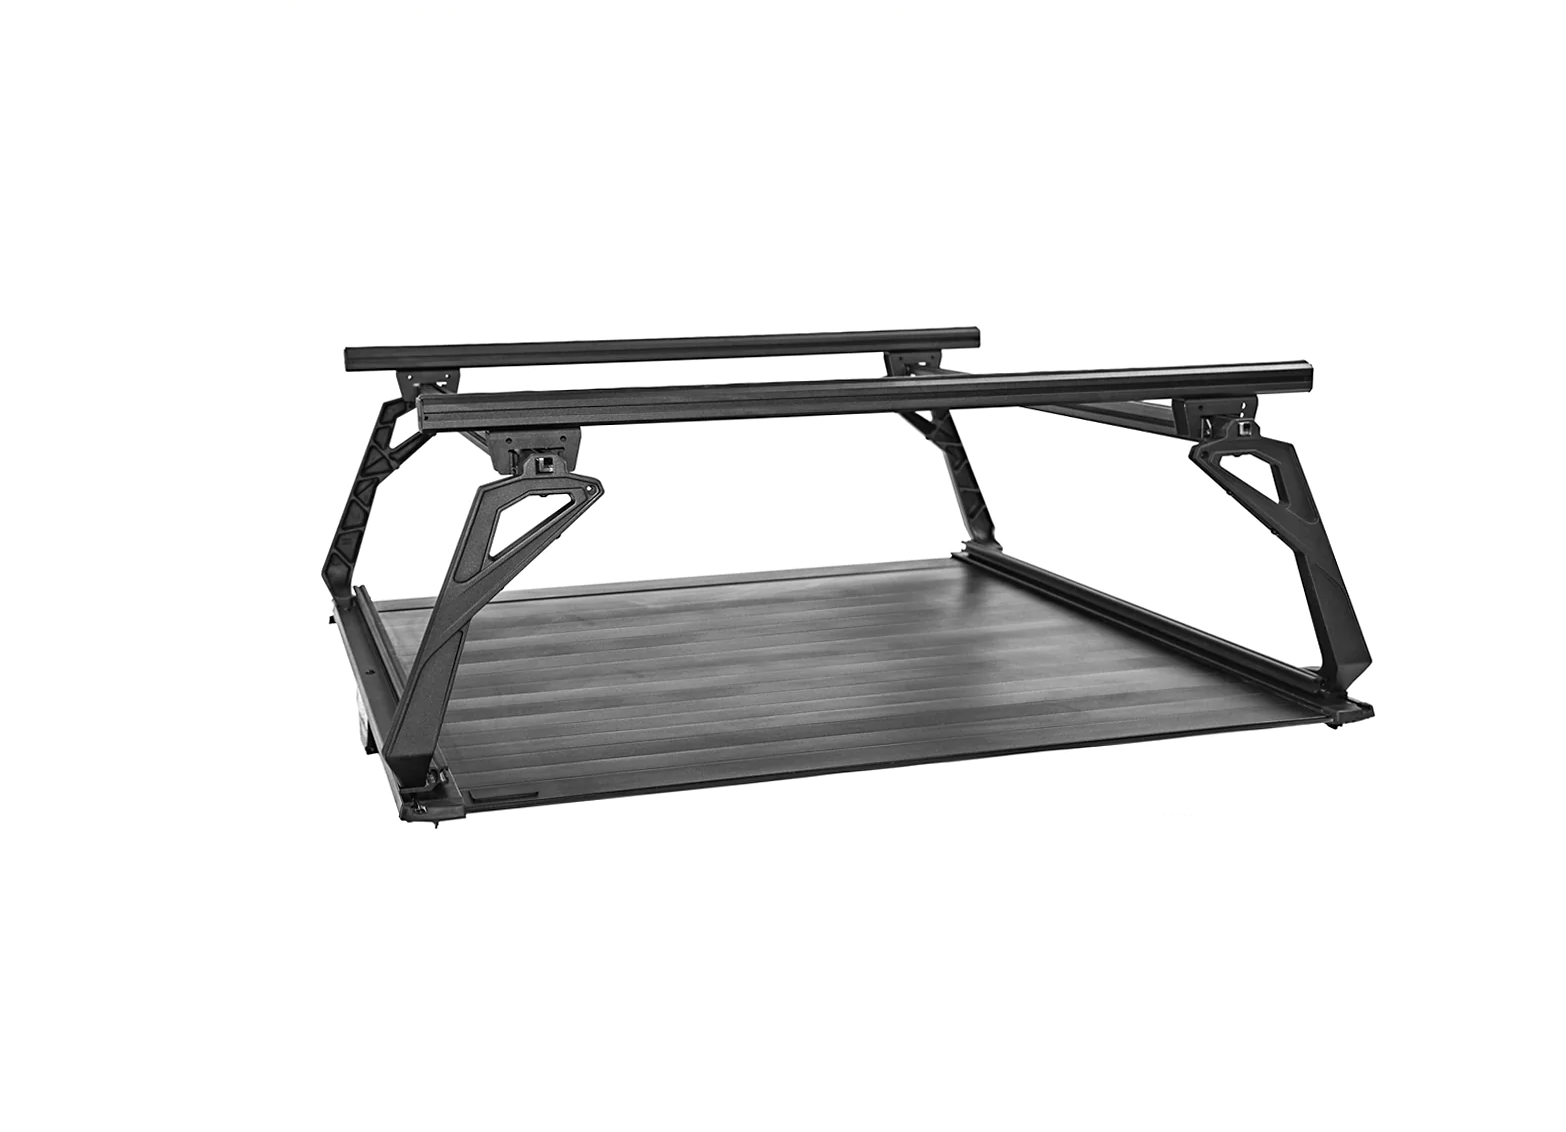 Leitner Designs ACS Forged Tonneau | 05-22 Toyota Tacoma Long Bed Bed Rack Kit - Leitner Canada